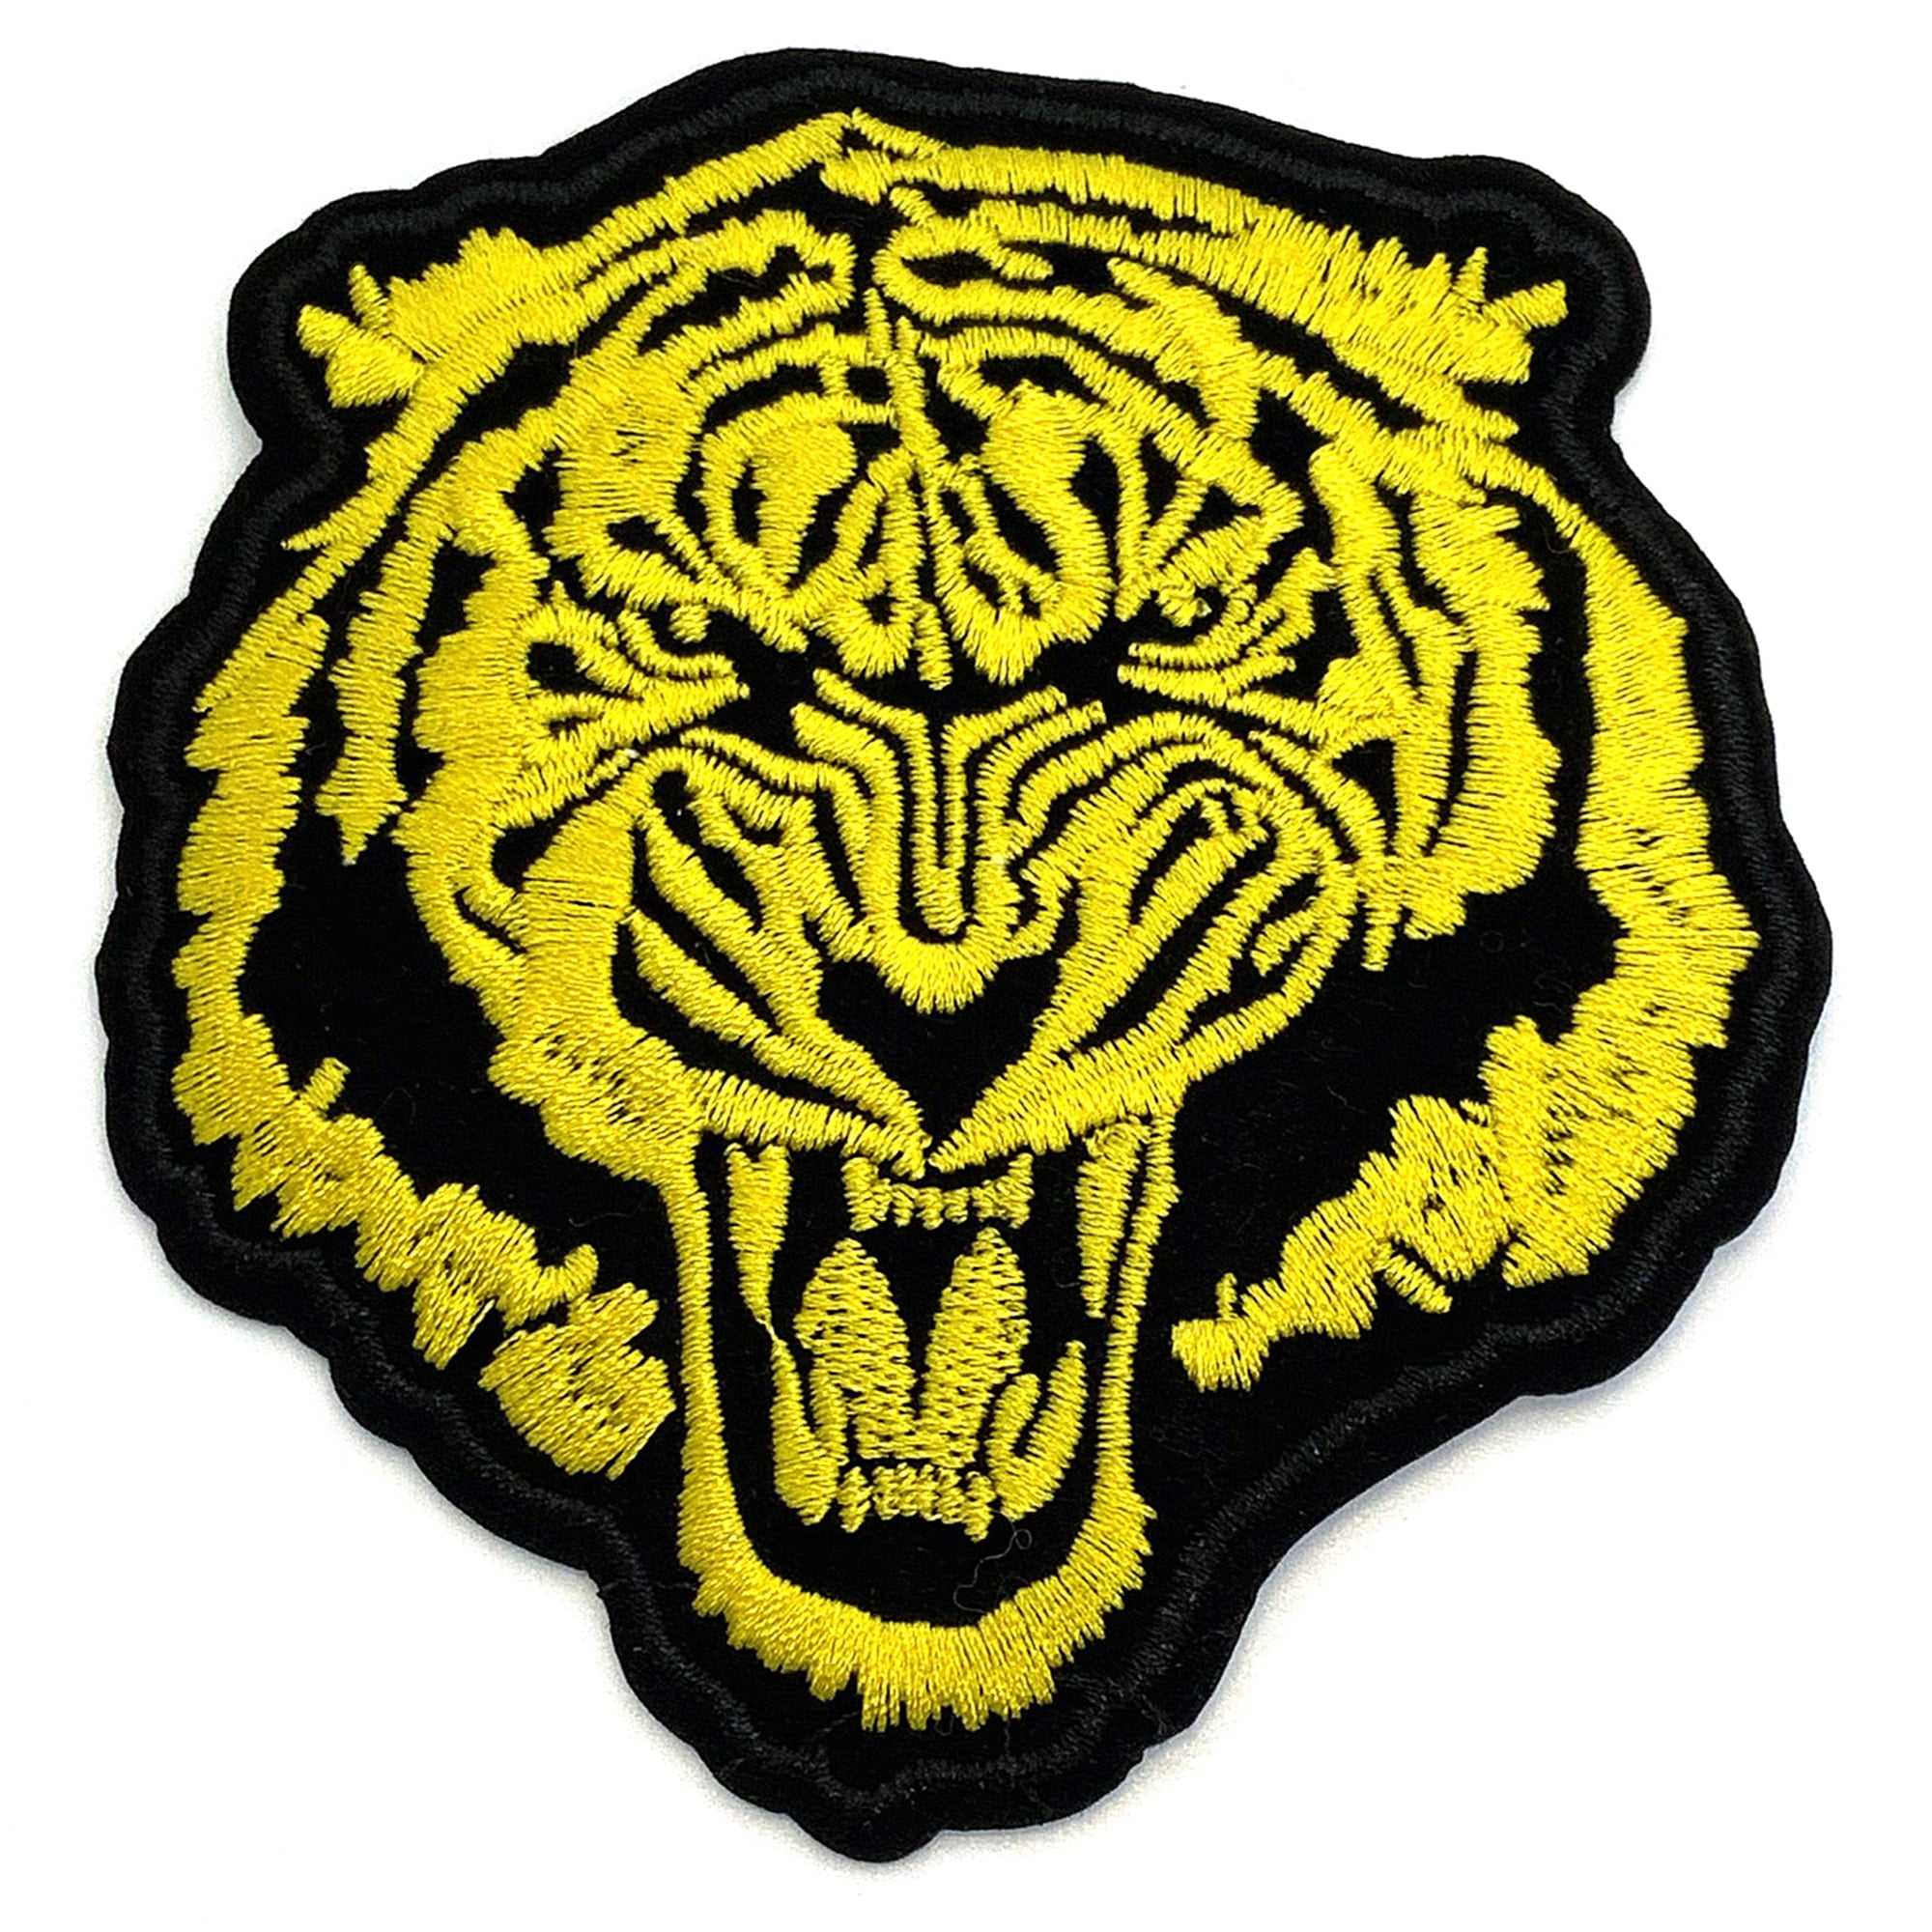 Tiger Patch Large Embroidered Iron-On Applique Roaring Bengal Striped Souvenir